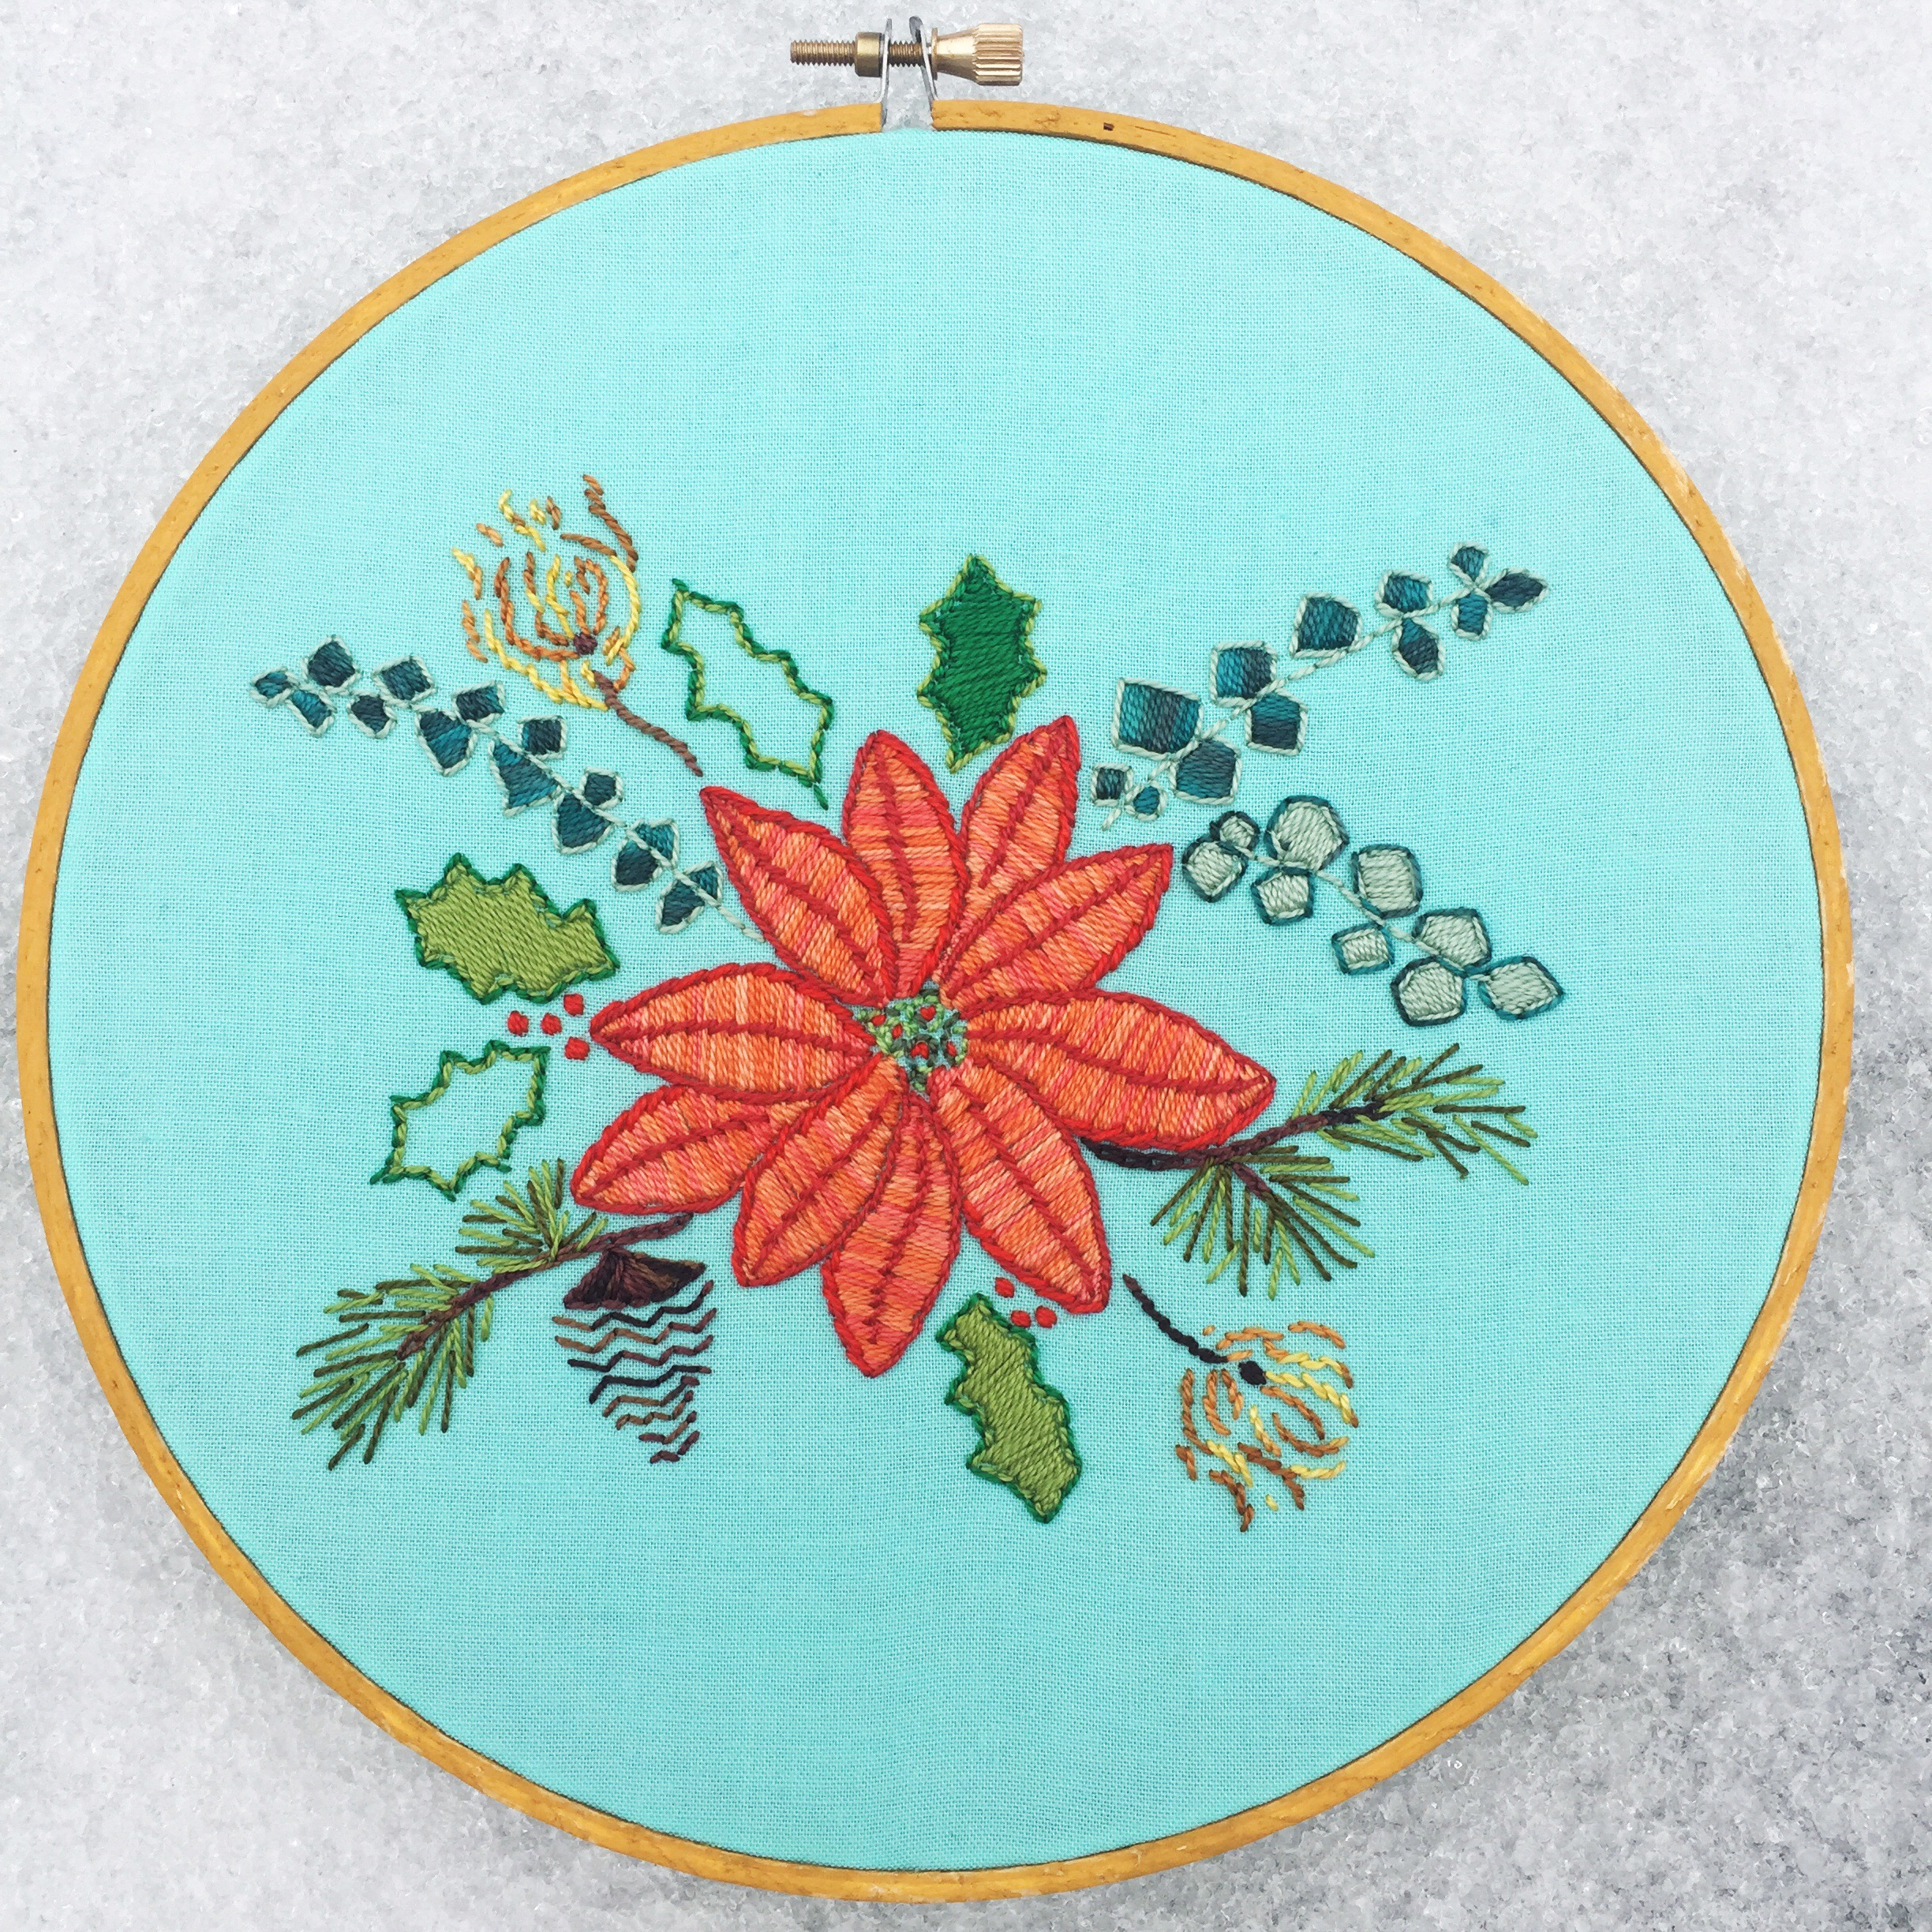 How To Create Embroidery Patterns Wildboho Embroidery Patterns Wildboho